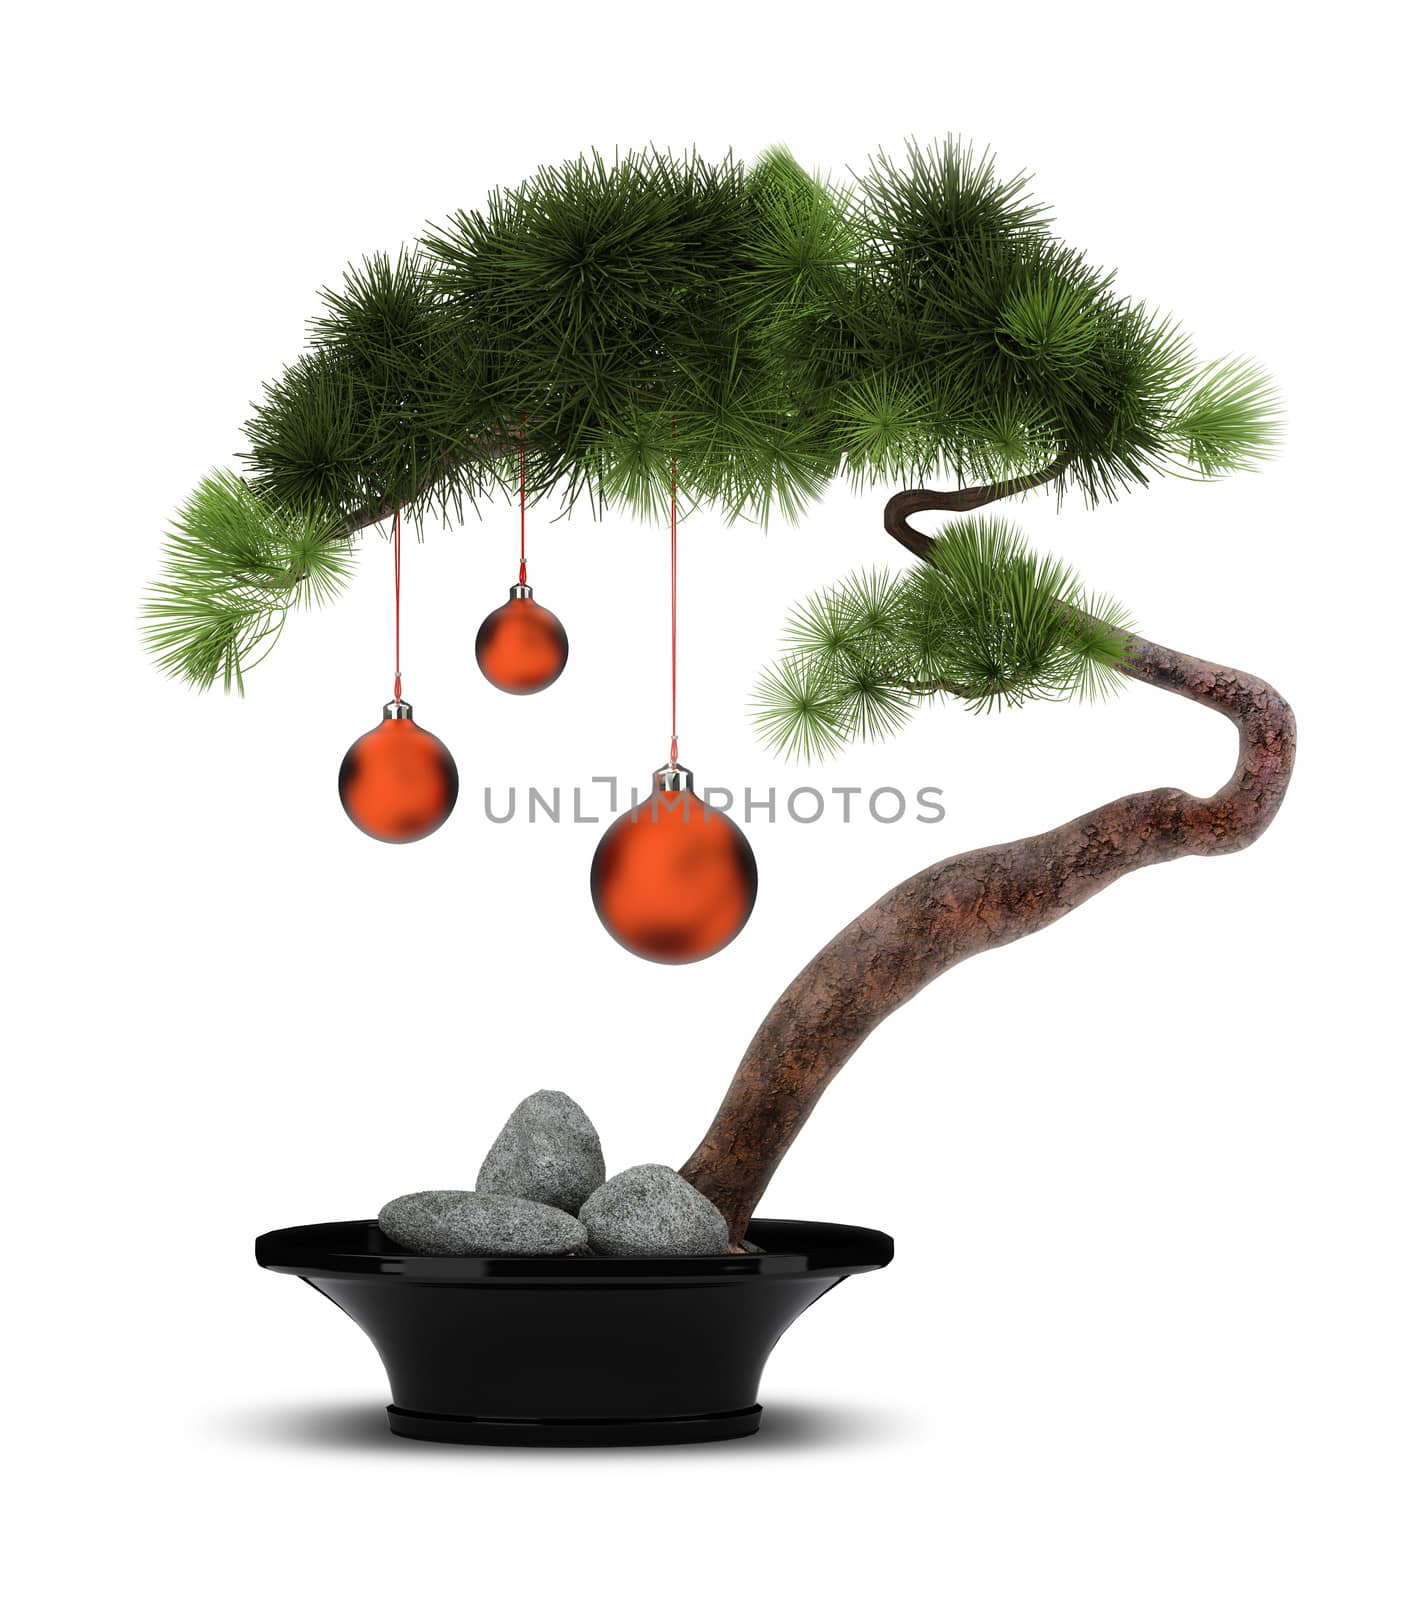 The Chinese new year. A decorative pine with red spheres. Bonsai.